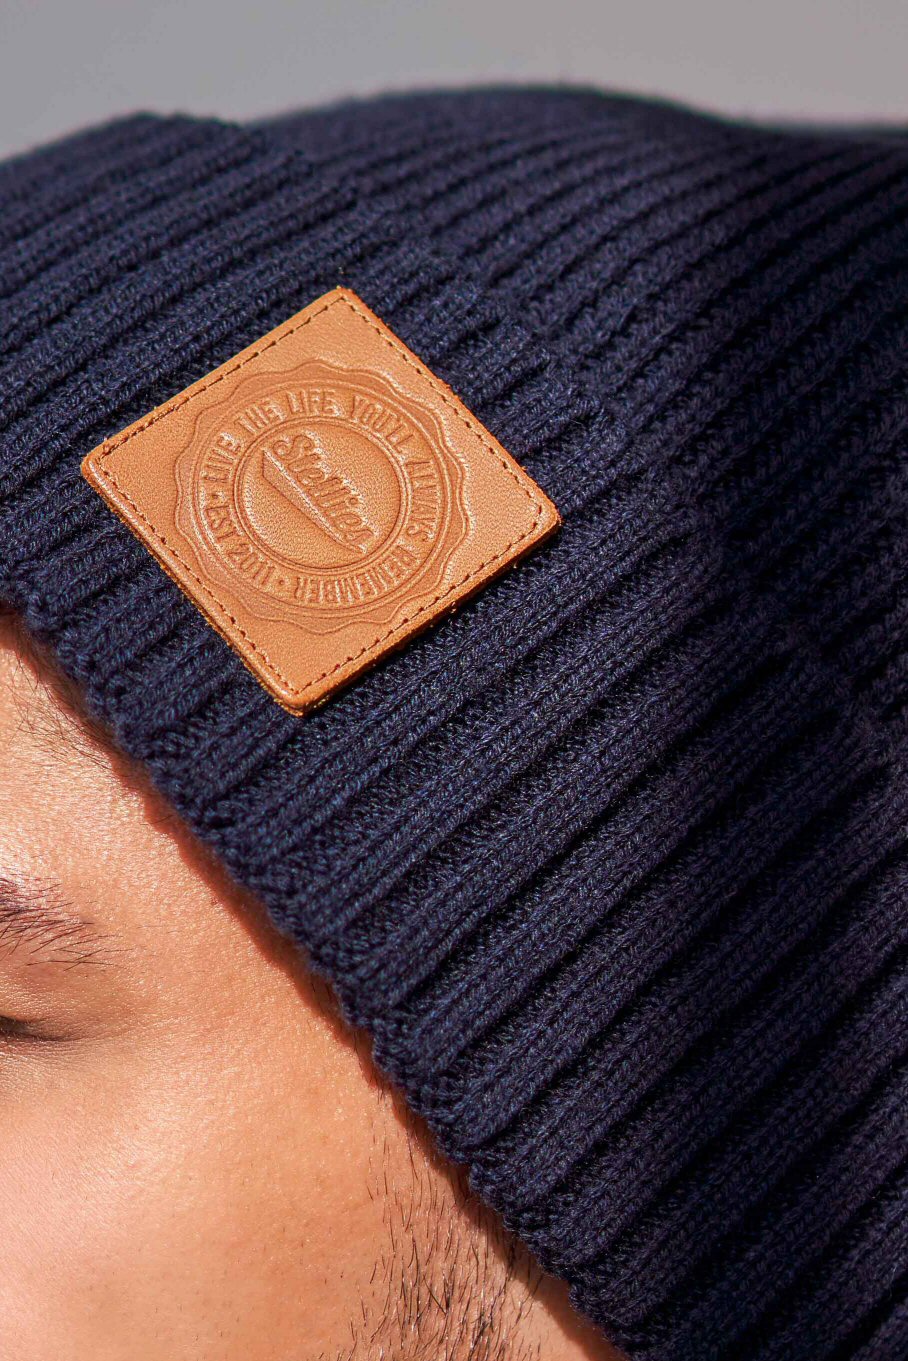 The Wool Core Beanie in Navy